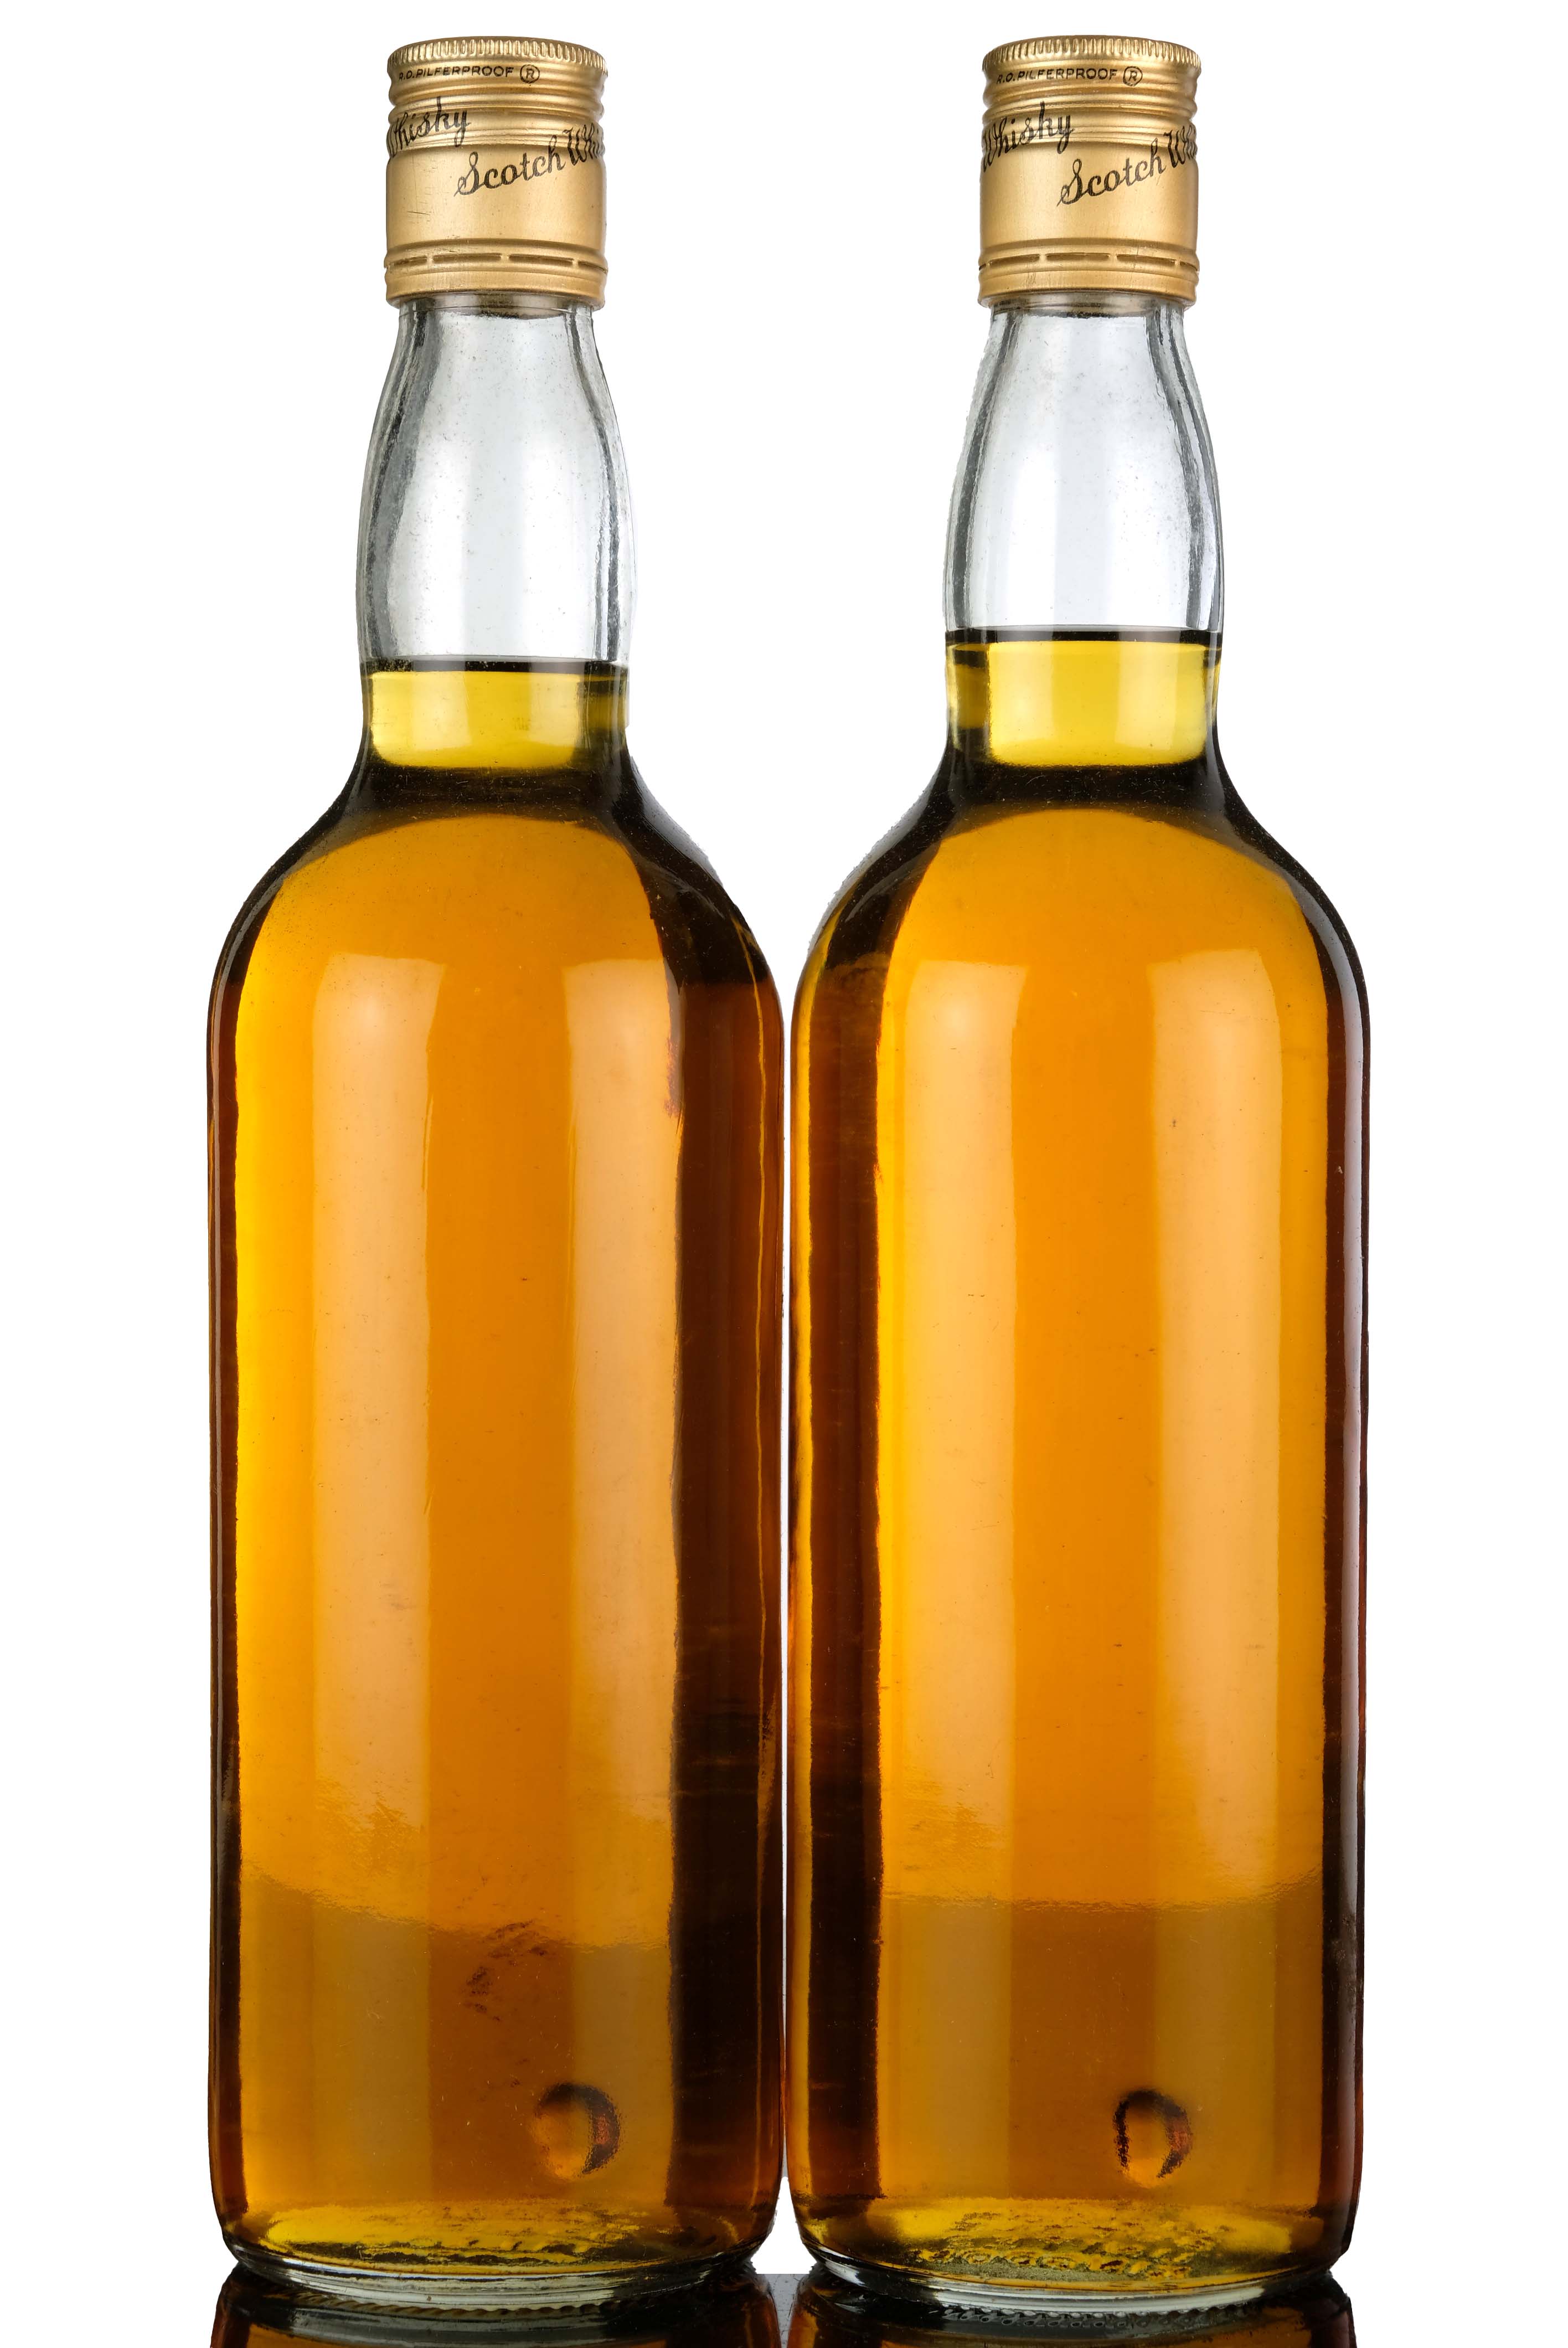 2 x Ben Nevis 1966-1981 - 15 Year Old - Private Bottling